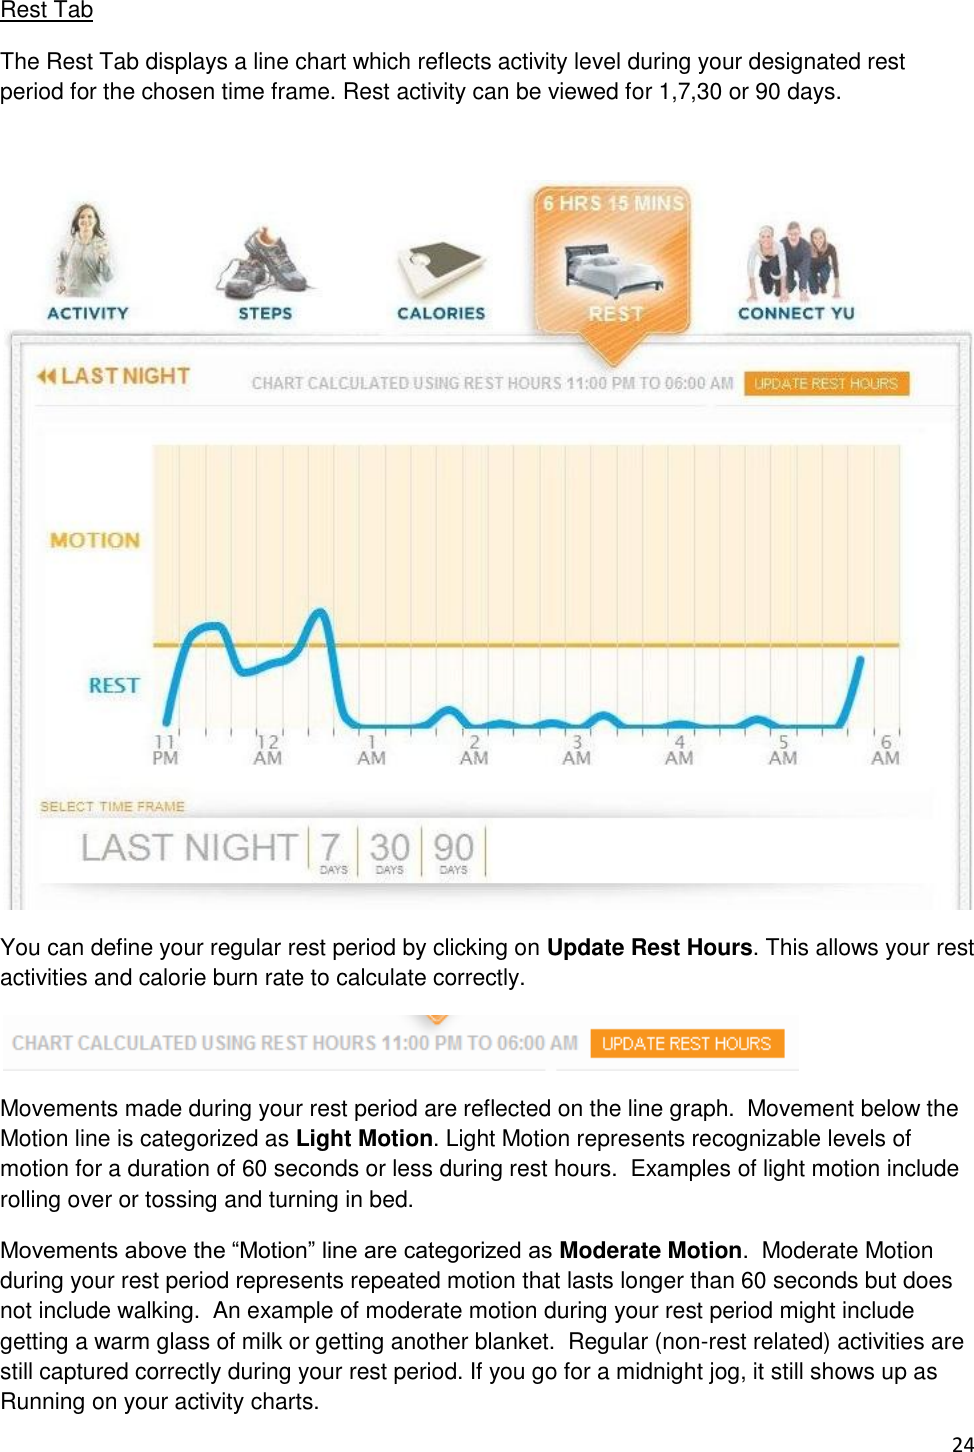 24 Rest Tab The Rest Tab displays a line chart which reflects activity level during your designated rest period for the chosen time frame. Rest activity can be viewed for 1,7,30 or 90 days.   You can define your regular rest period by clicking on Update Rest Hours. This allows your rest activities and calorie burn rate to calculate correctly.  Movements made during your rest period are reflected on the line graph.  Movement below the Motion line is categorized as Light Motion. Light Motion represents recognizable levels of motion for a duration of 60 seconds or less during rest hours.  Examples of light motion include rolling over or tossing and turning in bed. Movements above the “Motion” line are categorized as Moderate Motion.  Moderate Motion during your rest period represents repeated motion that lasts longer than 60 seconds but does not include walking.  An example of moderate motion during your rest period might include getting a warm glass of milk or getting another blanket.  Regular (non-rest related) activities are still captured correctly during your rest period. If you go for a midnight jog, it still shows up as Running on your activity charts. 